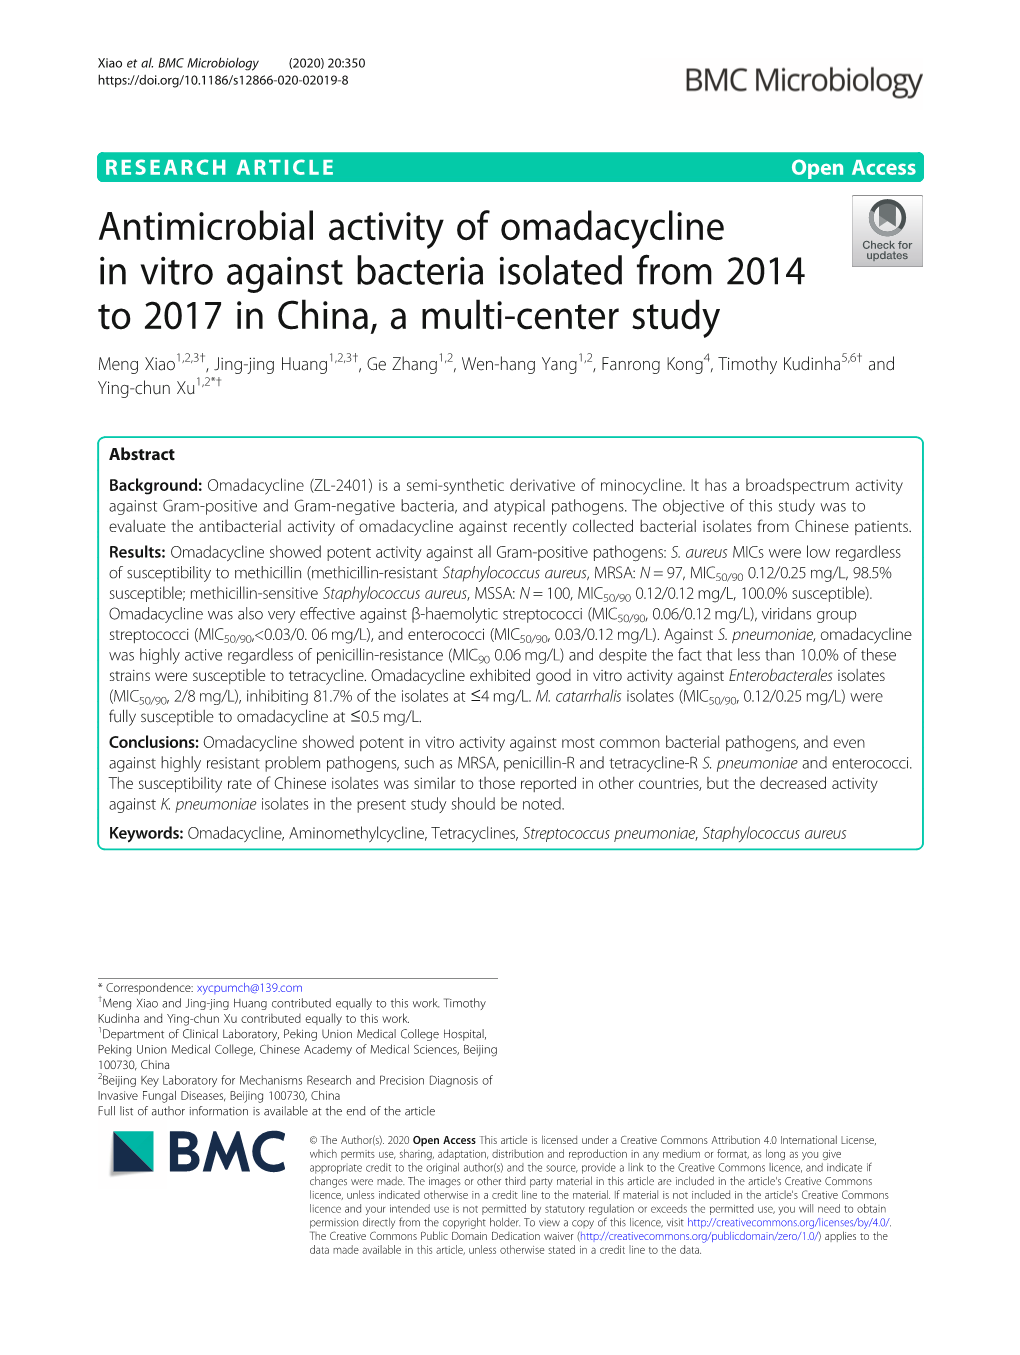 Antimicrobial Activity of Omadacycline in Vitro Against Bacteria Isolated